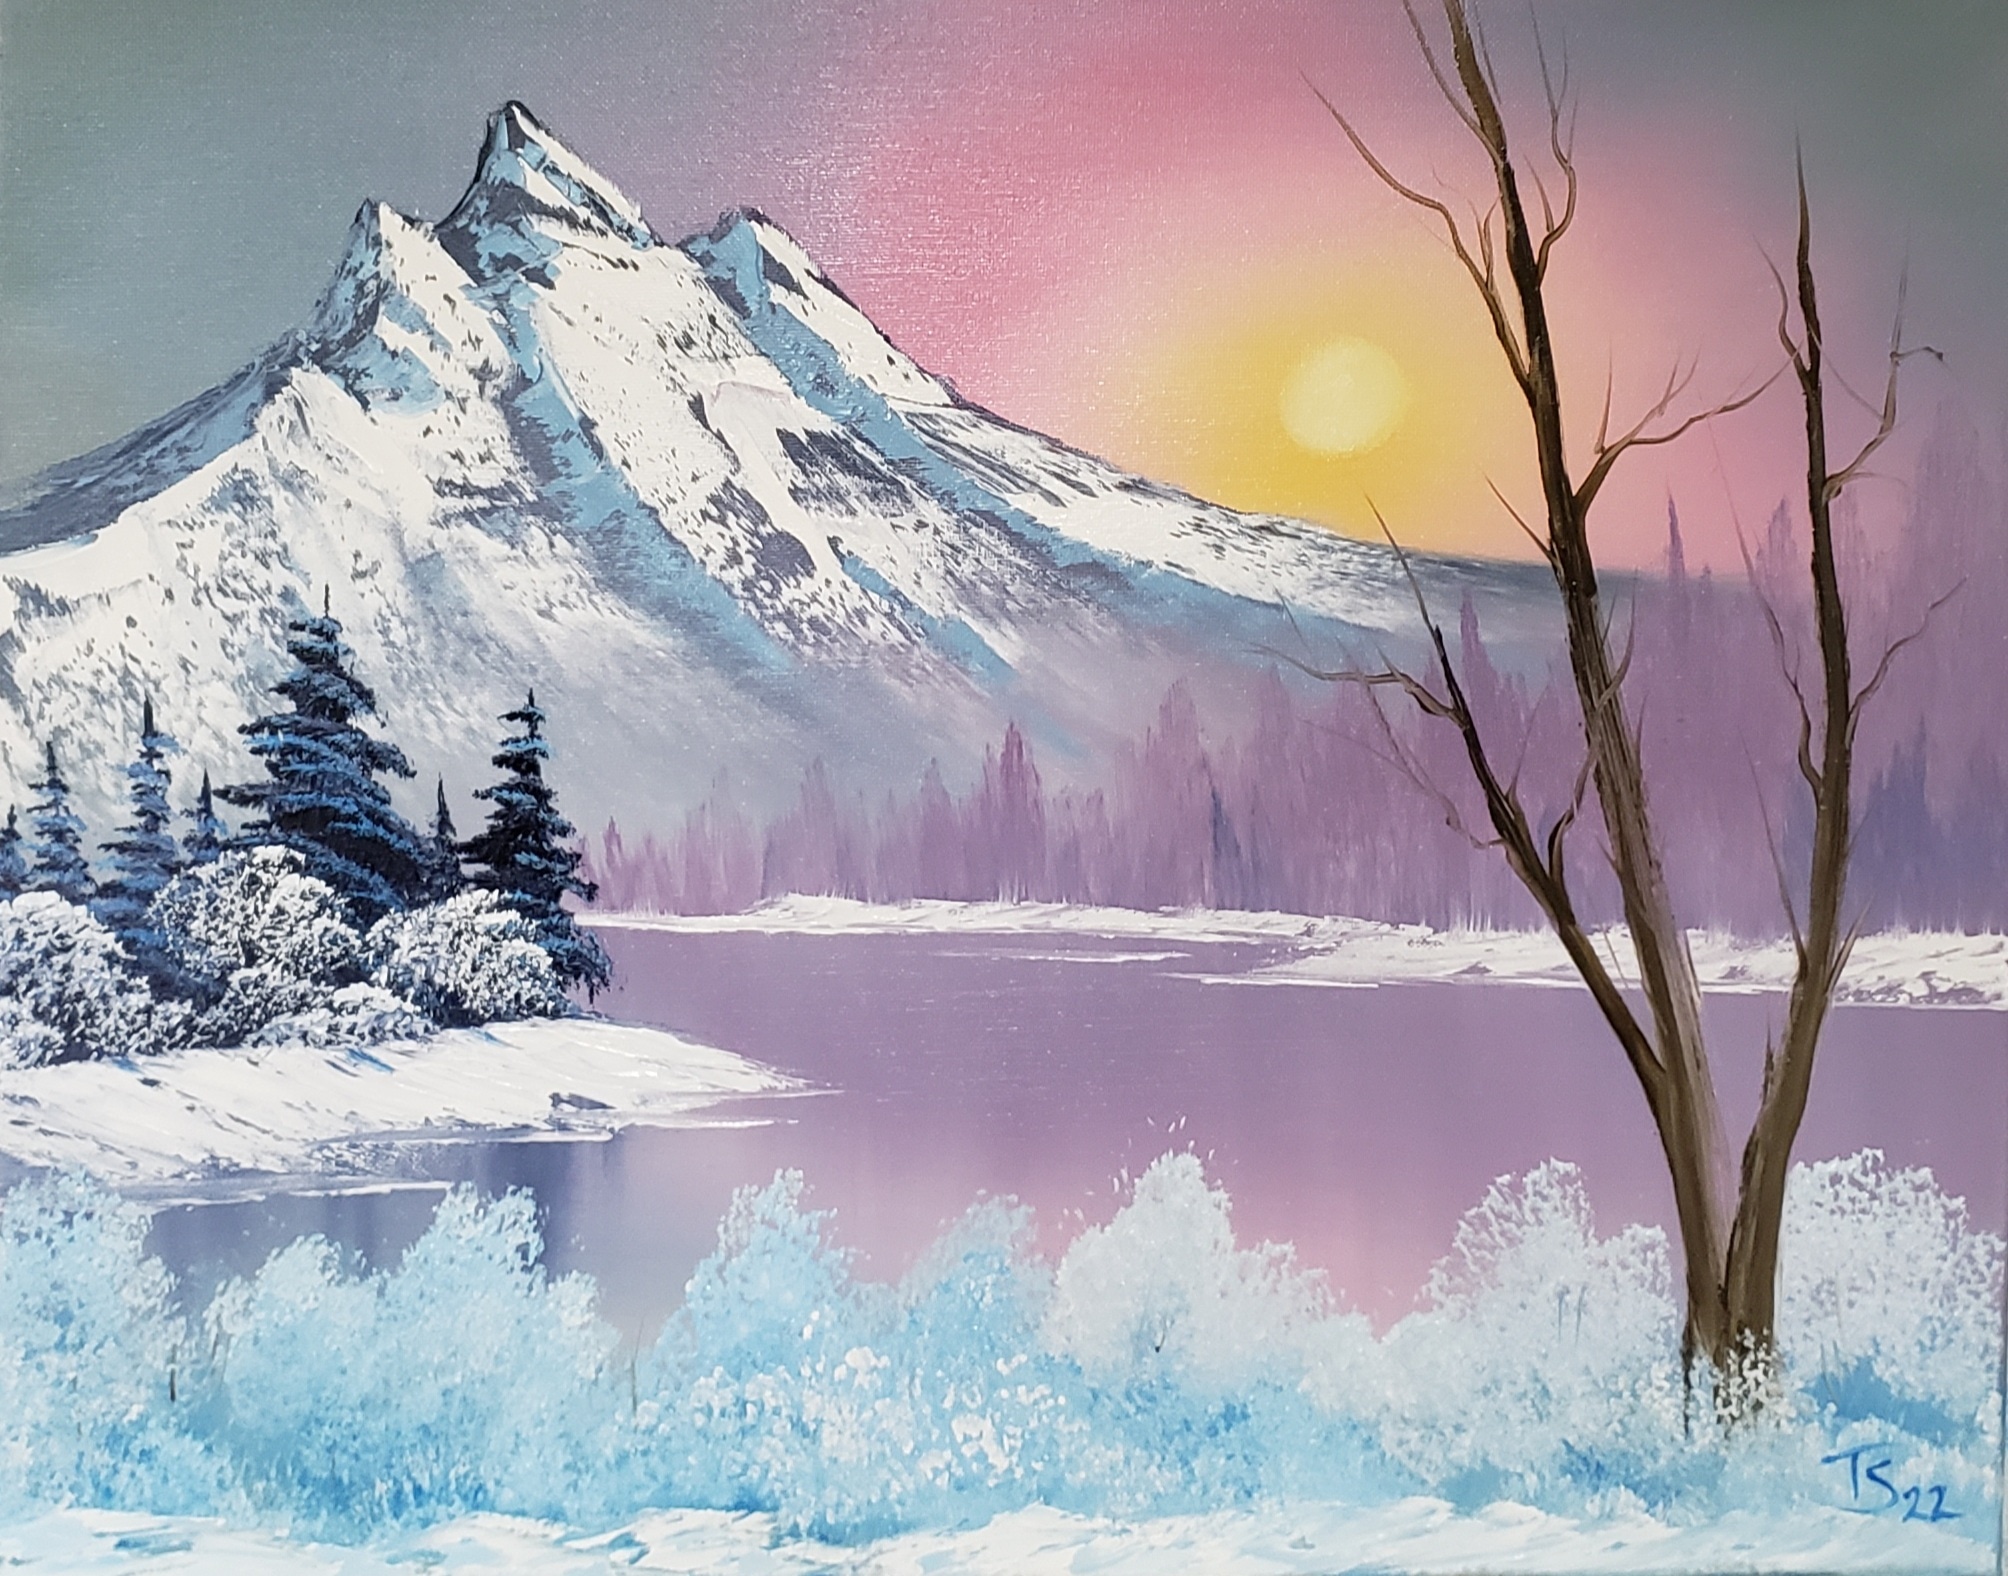 Valley News - In Sharon, happy little painters at Bob Ross Paint Night